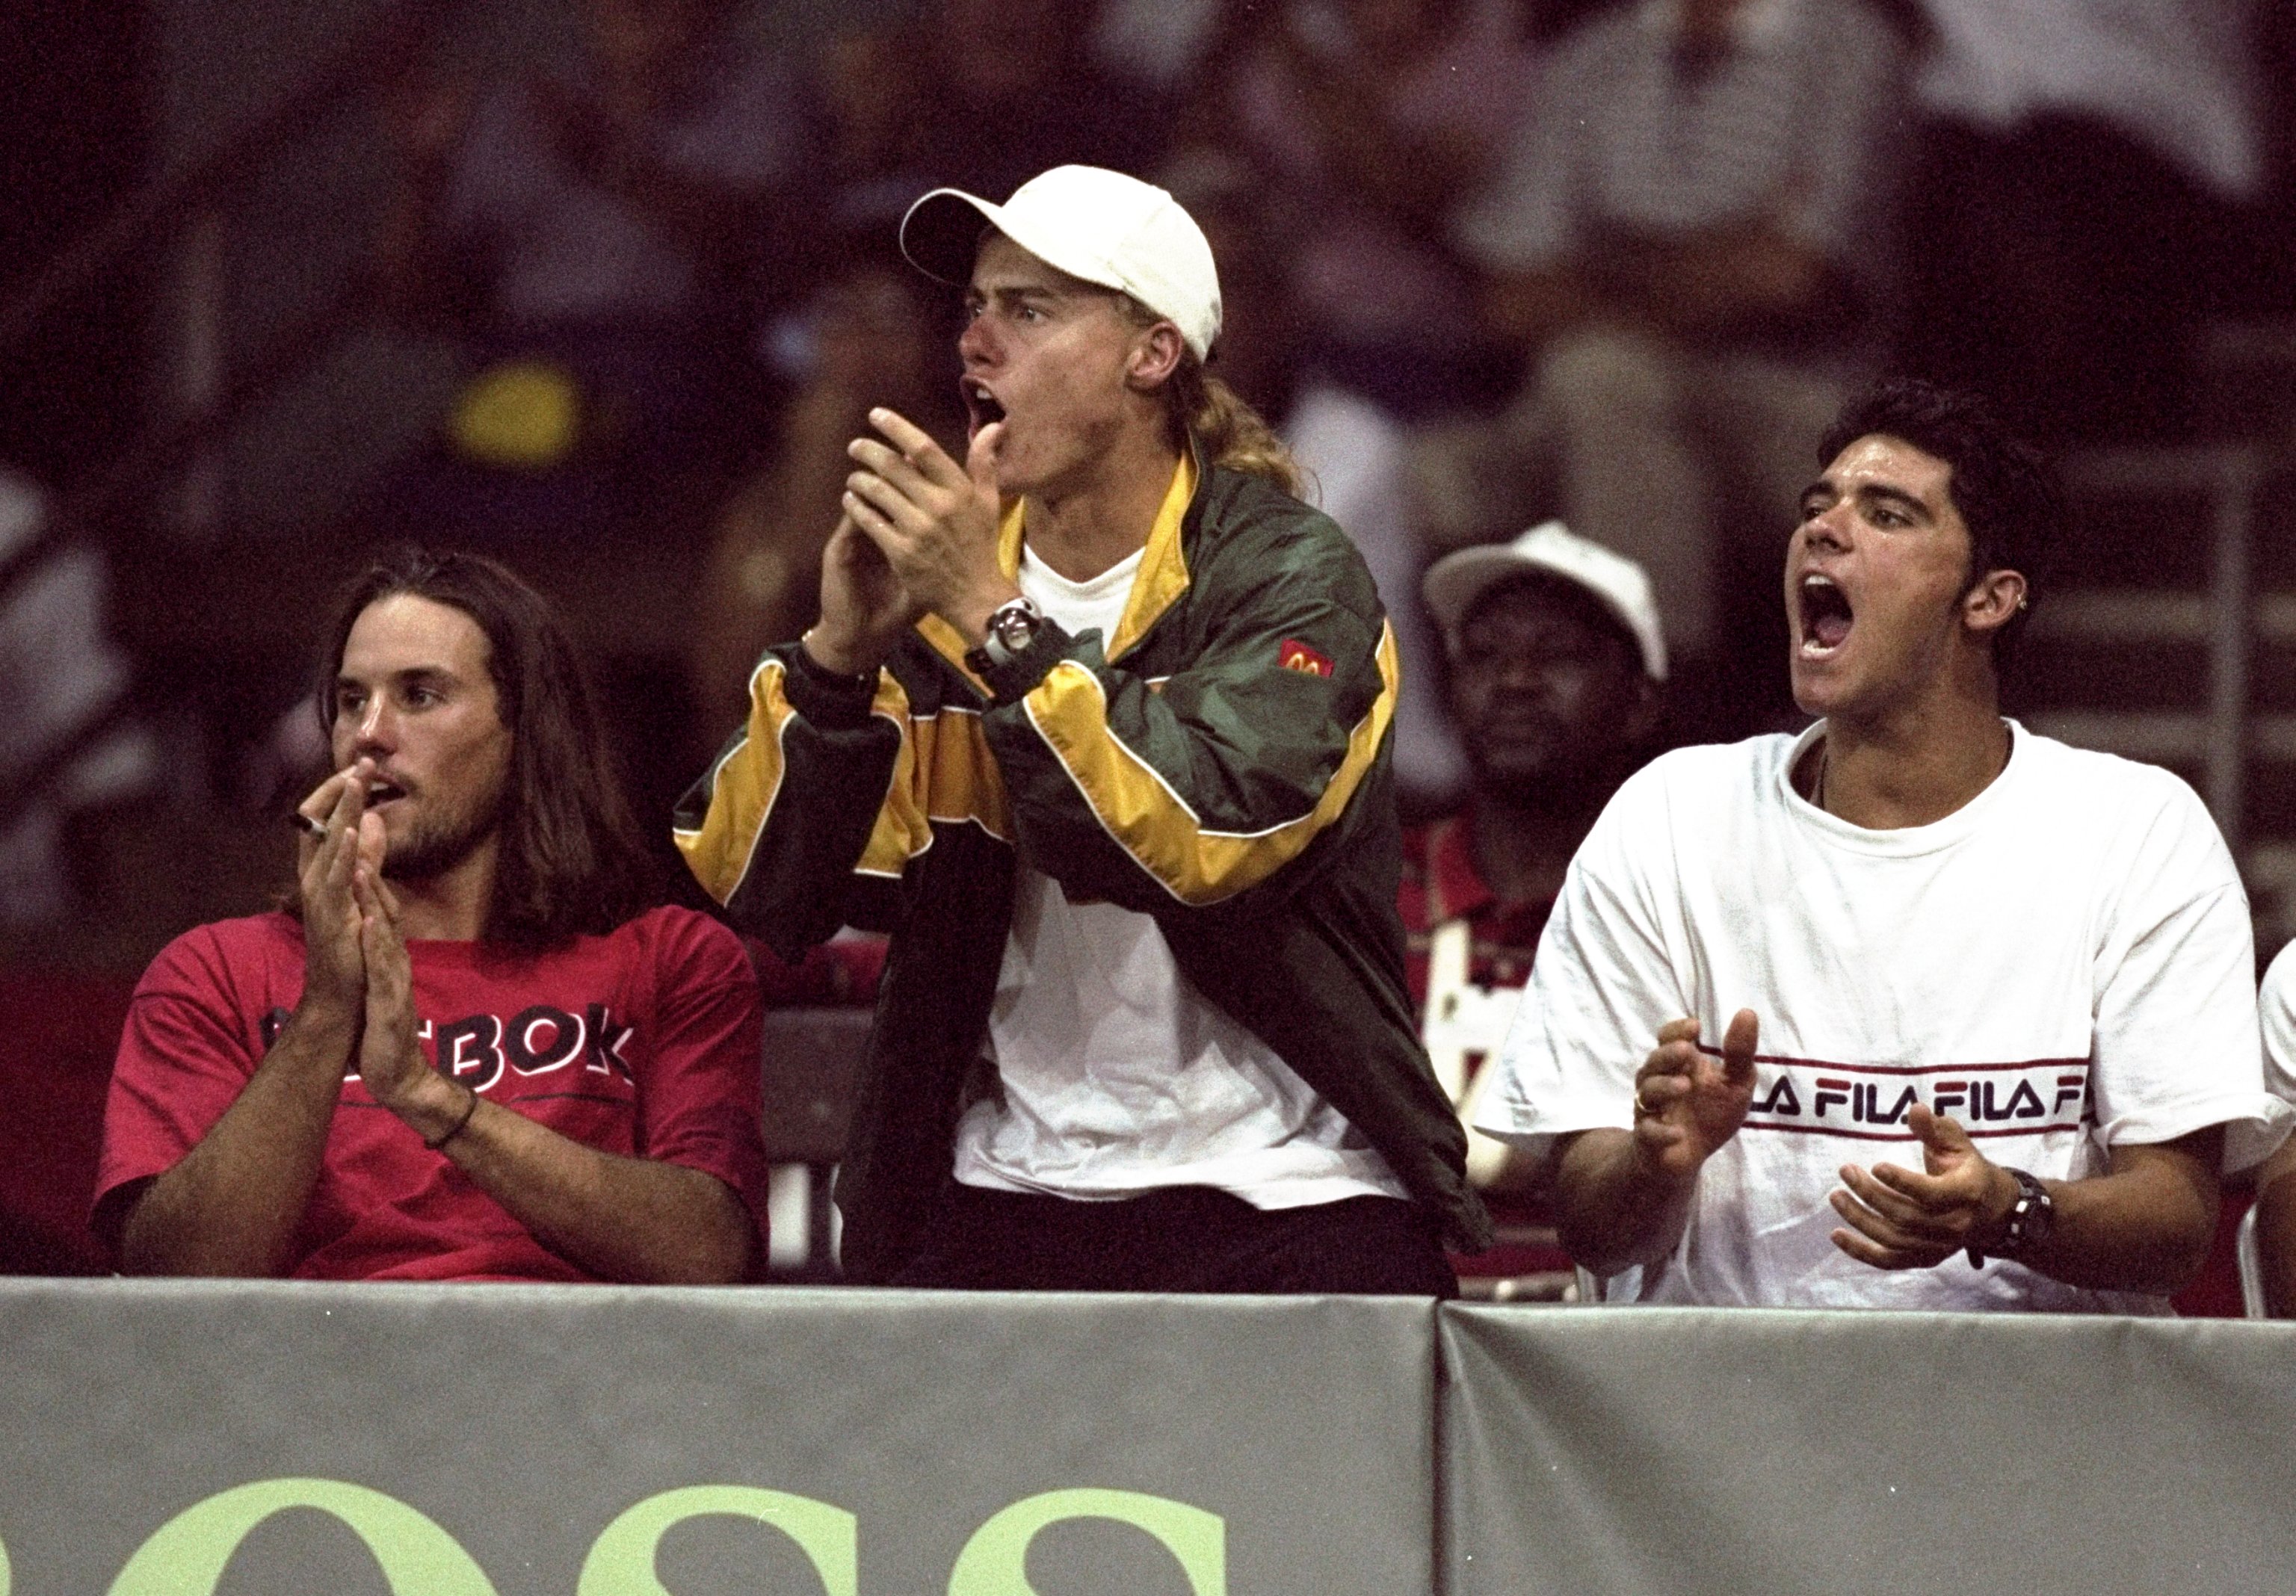 Pat Rafter, Lleyton Hewitt and Mark Philippoussis cheer Australia against Zimbabwe in Davis Cup.